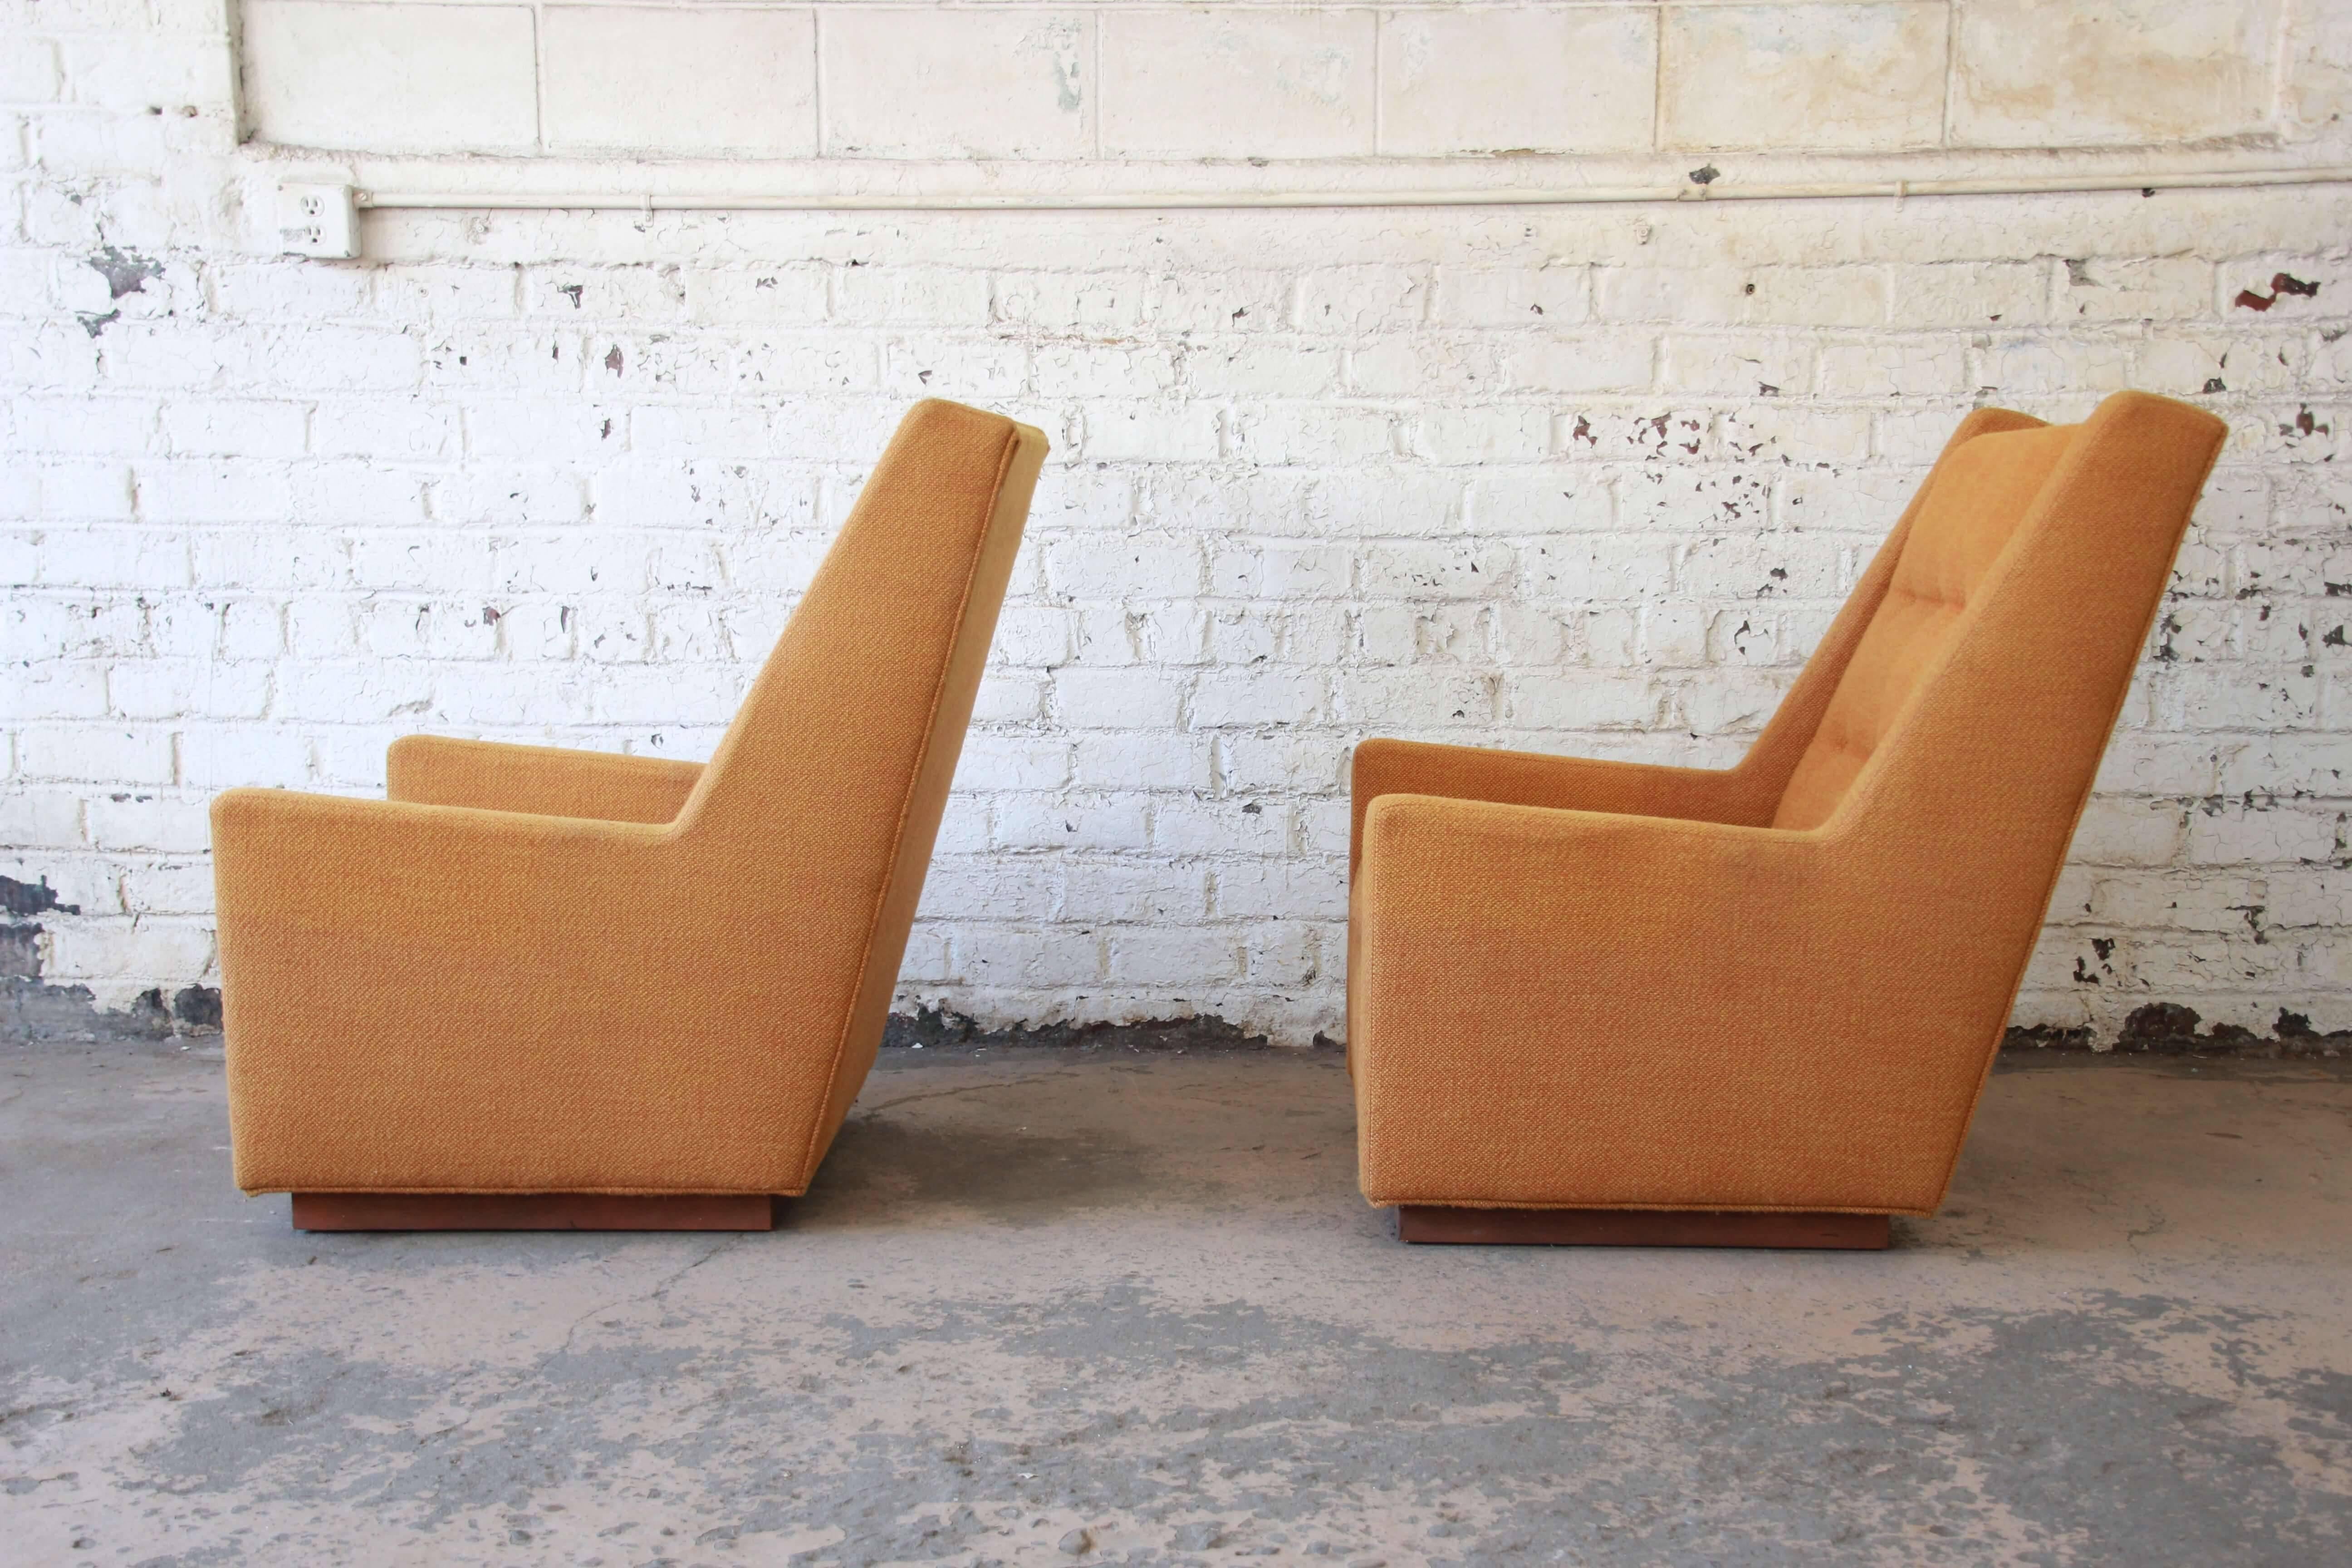 Walnut Pair of Lounge Chairs and Ottoman by Milo Baughman for James, Inc